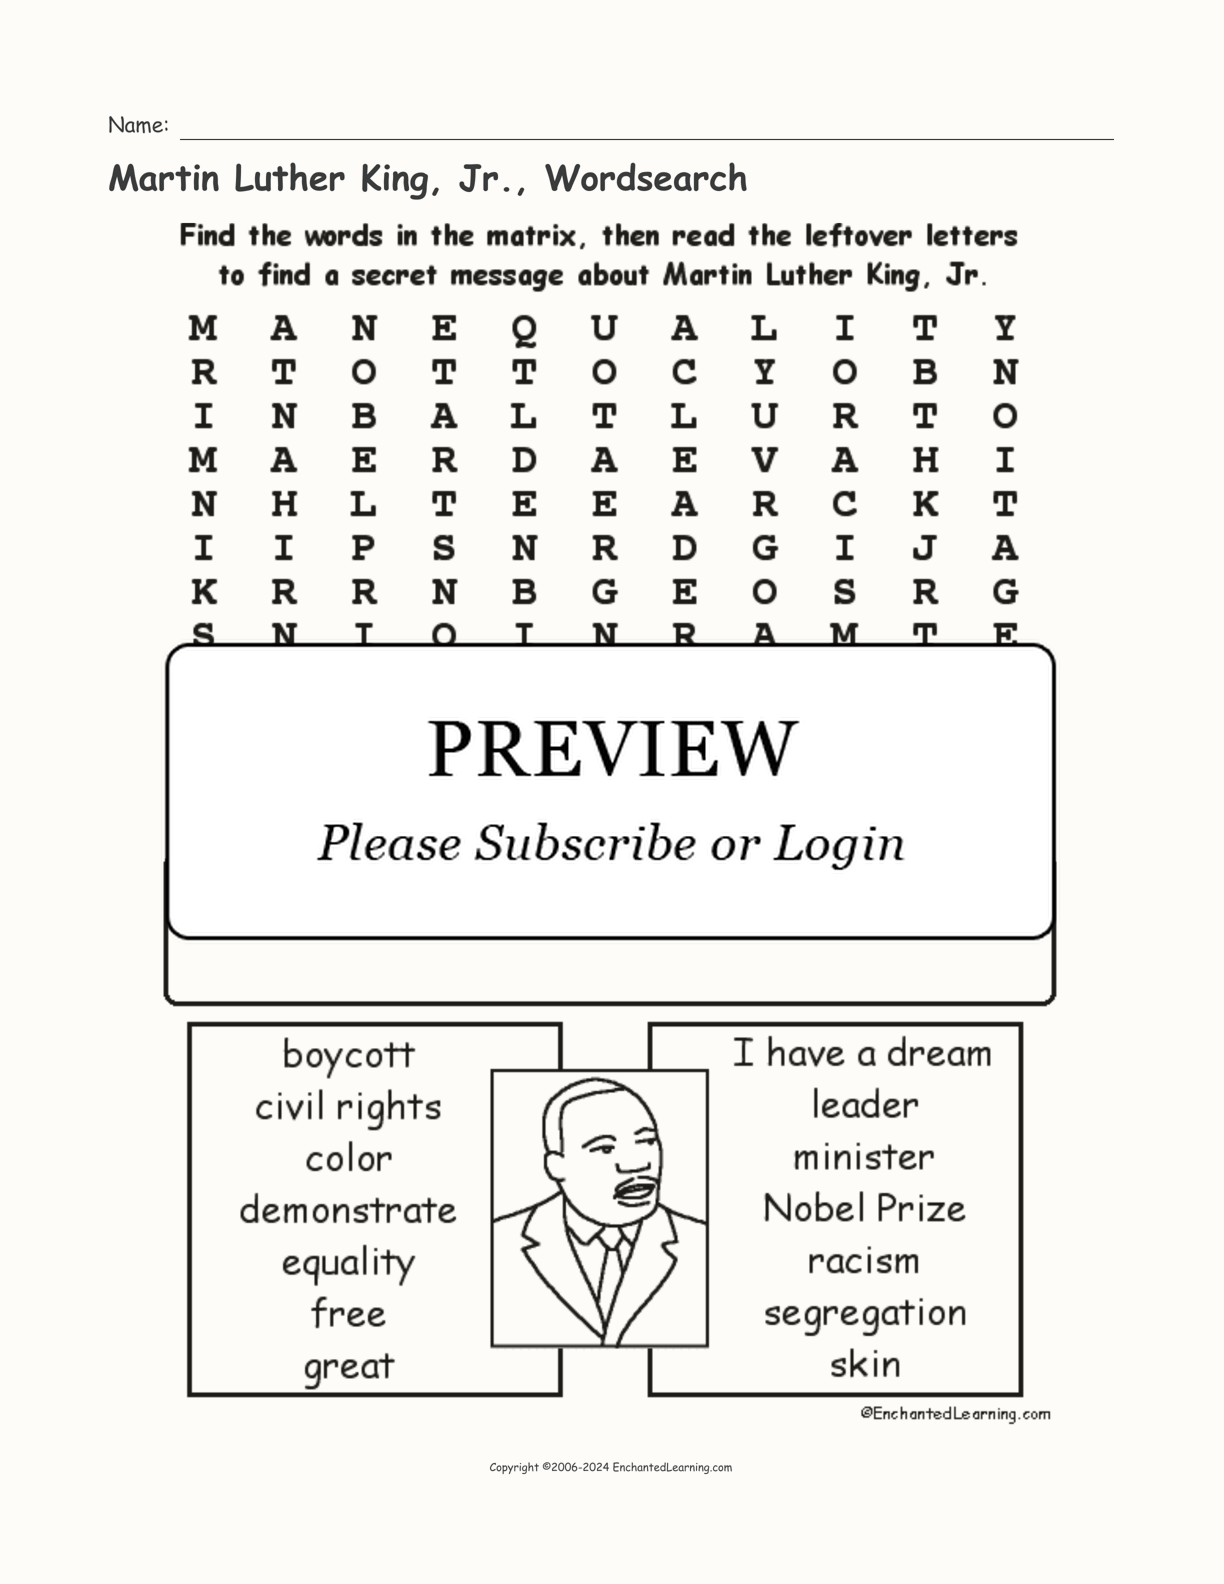 Martin Luther King, Jr., Wordsearch interactive worksheet page 1